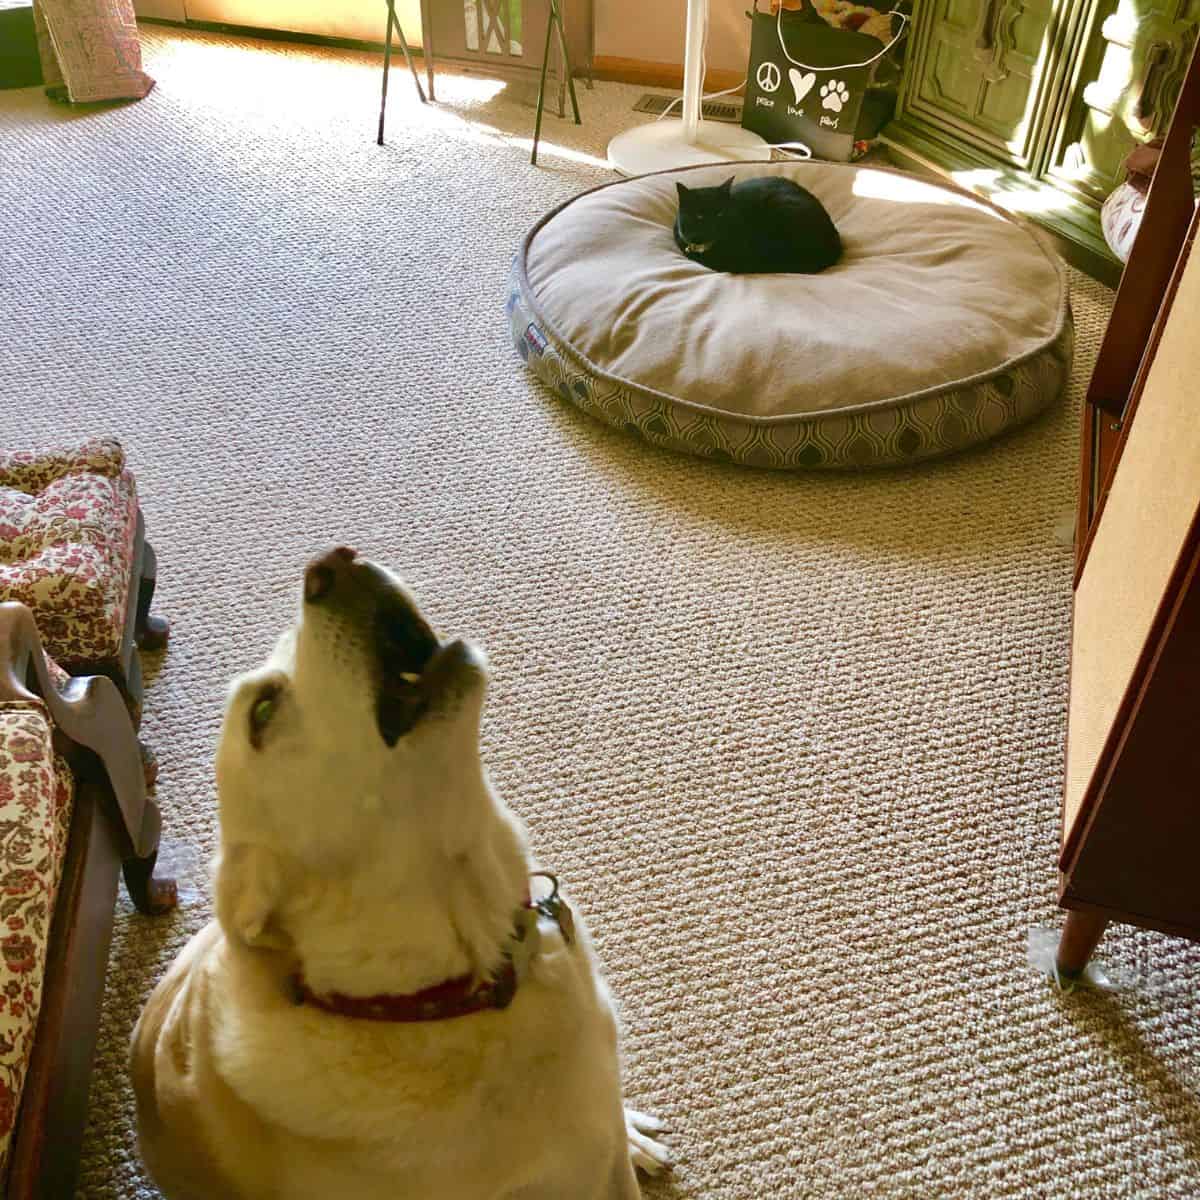 dog howling and cat lying in his bed